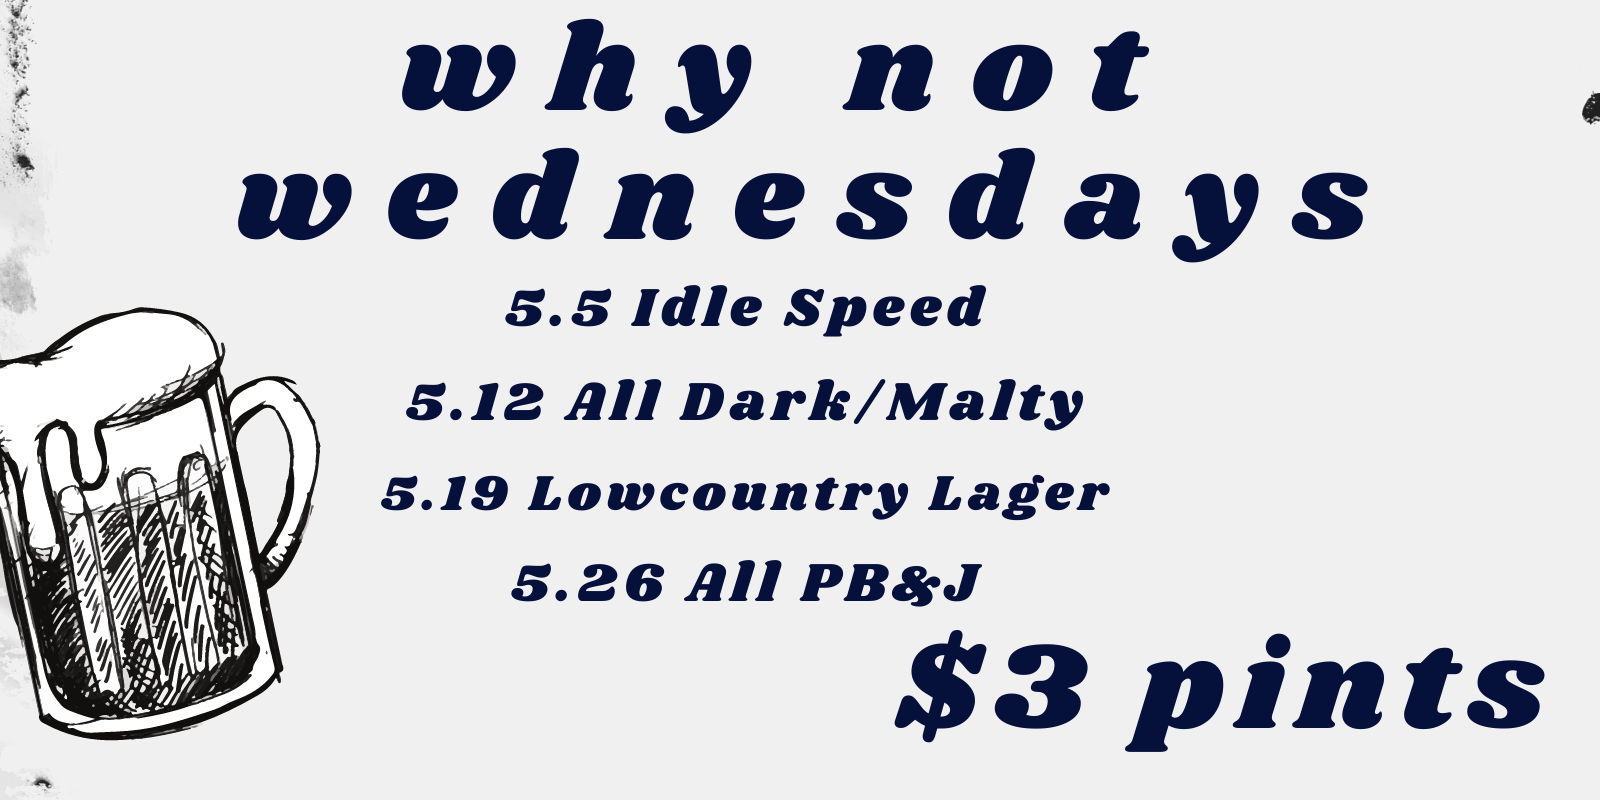 Why Not Wednesdays: Lowcountry Lager promotional image